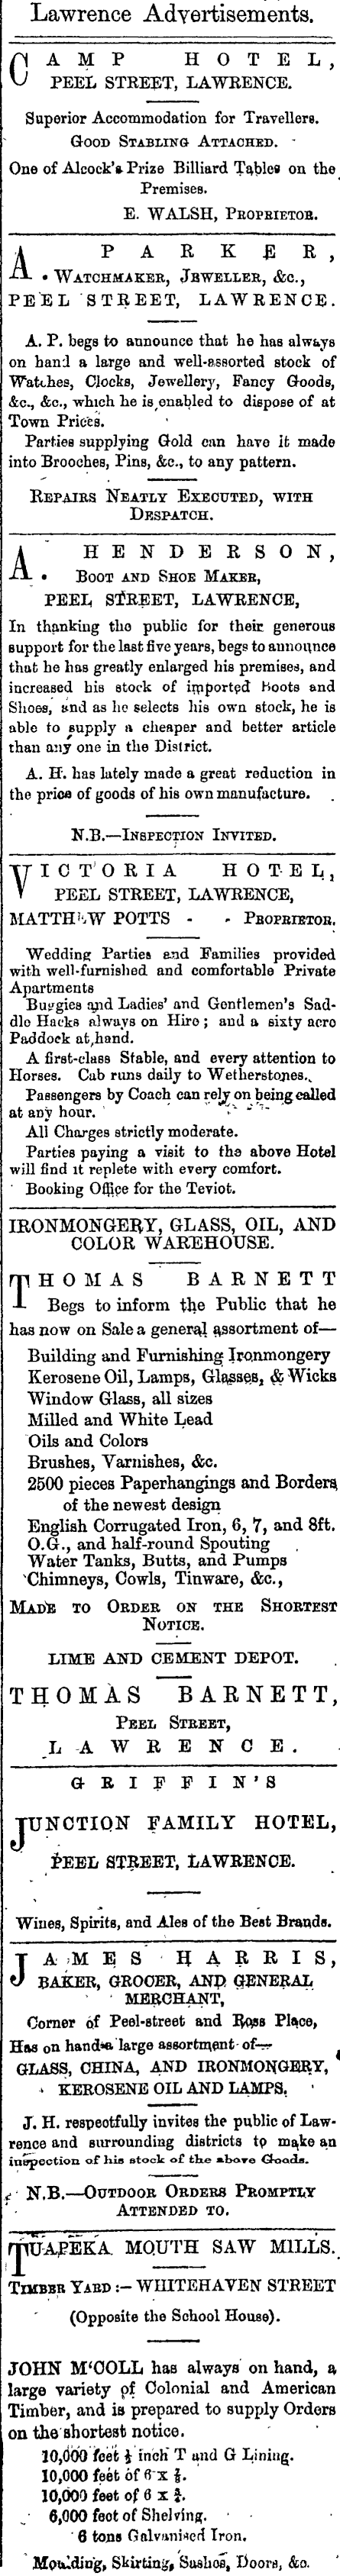 Papers Past Newspapers Tuapeka Times 22 August 1868 Page 1 Advertisements Column 3